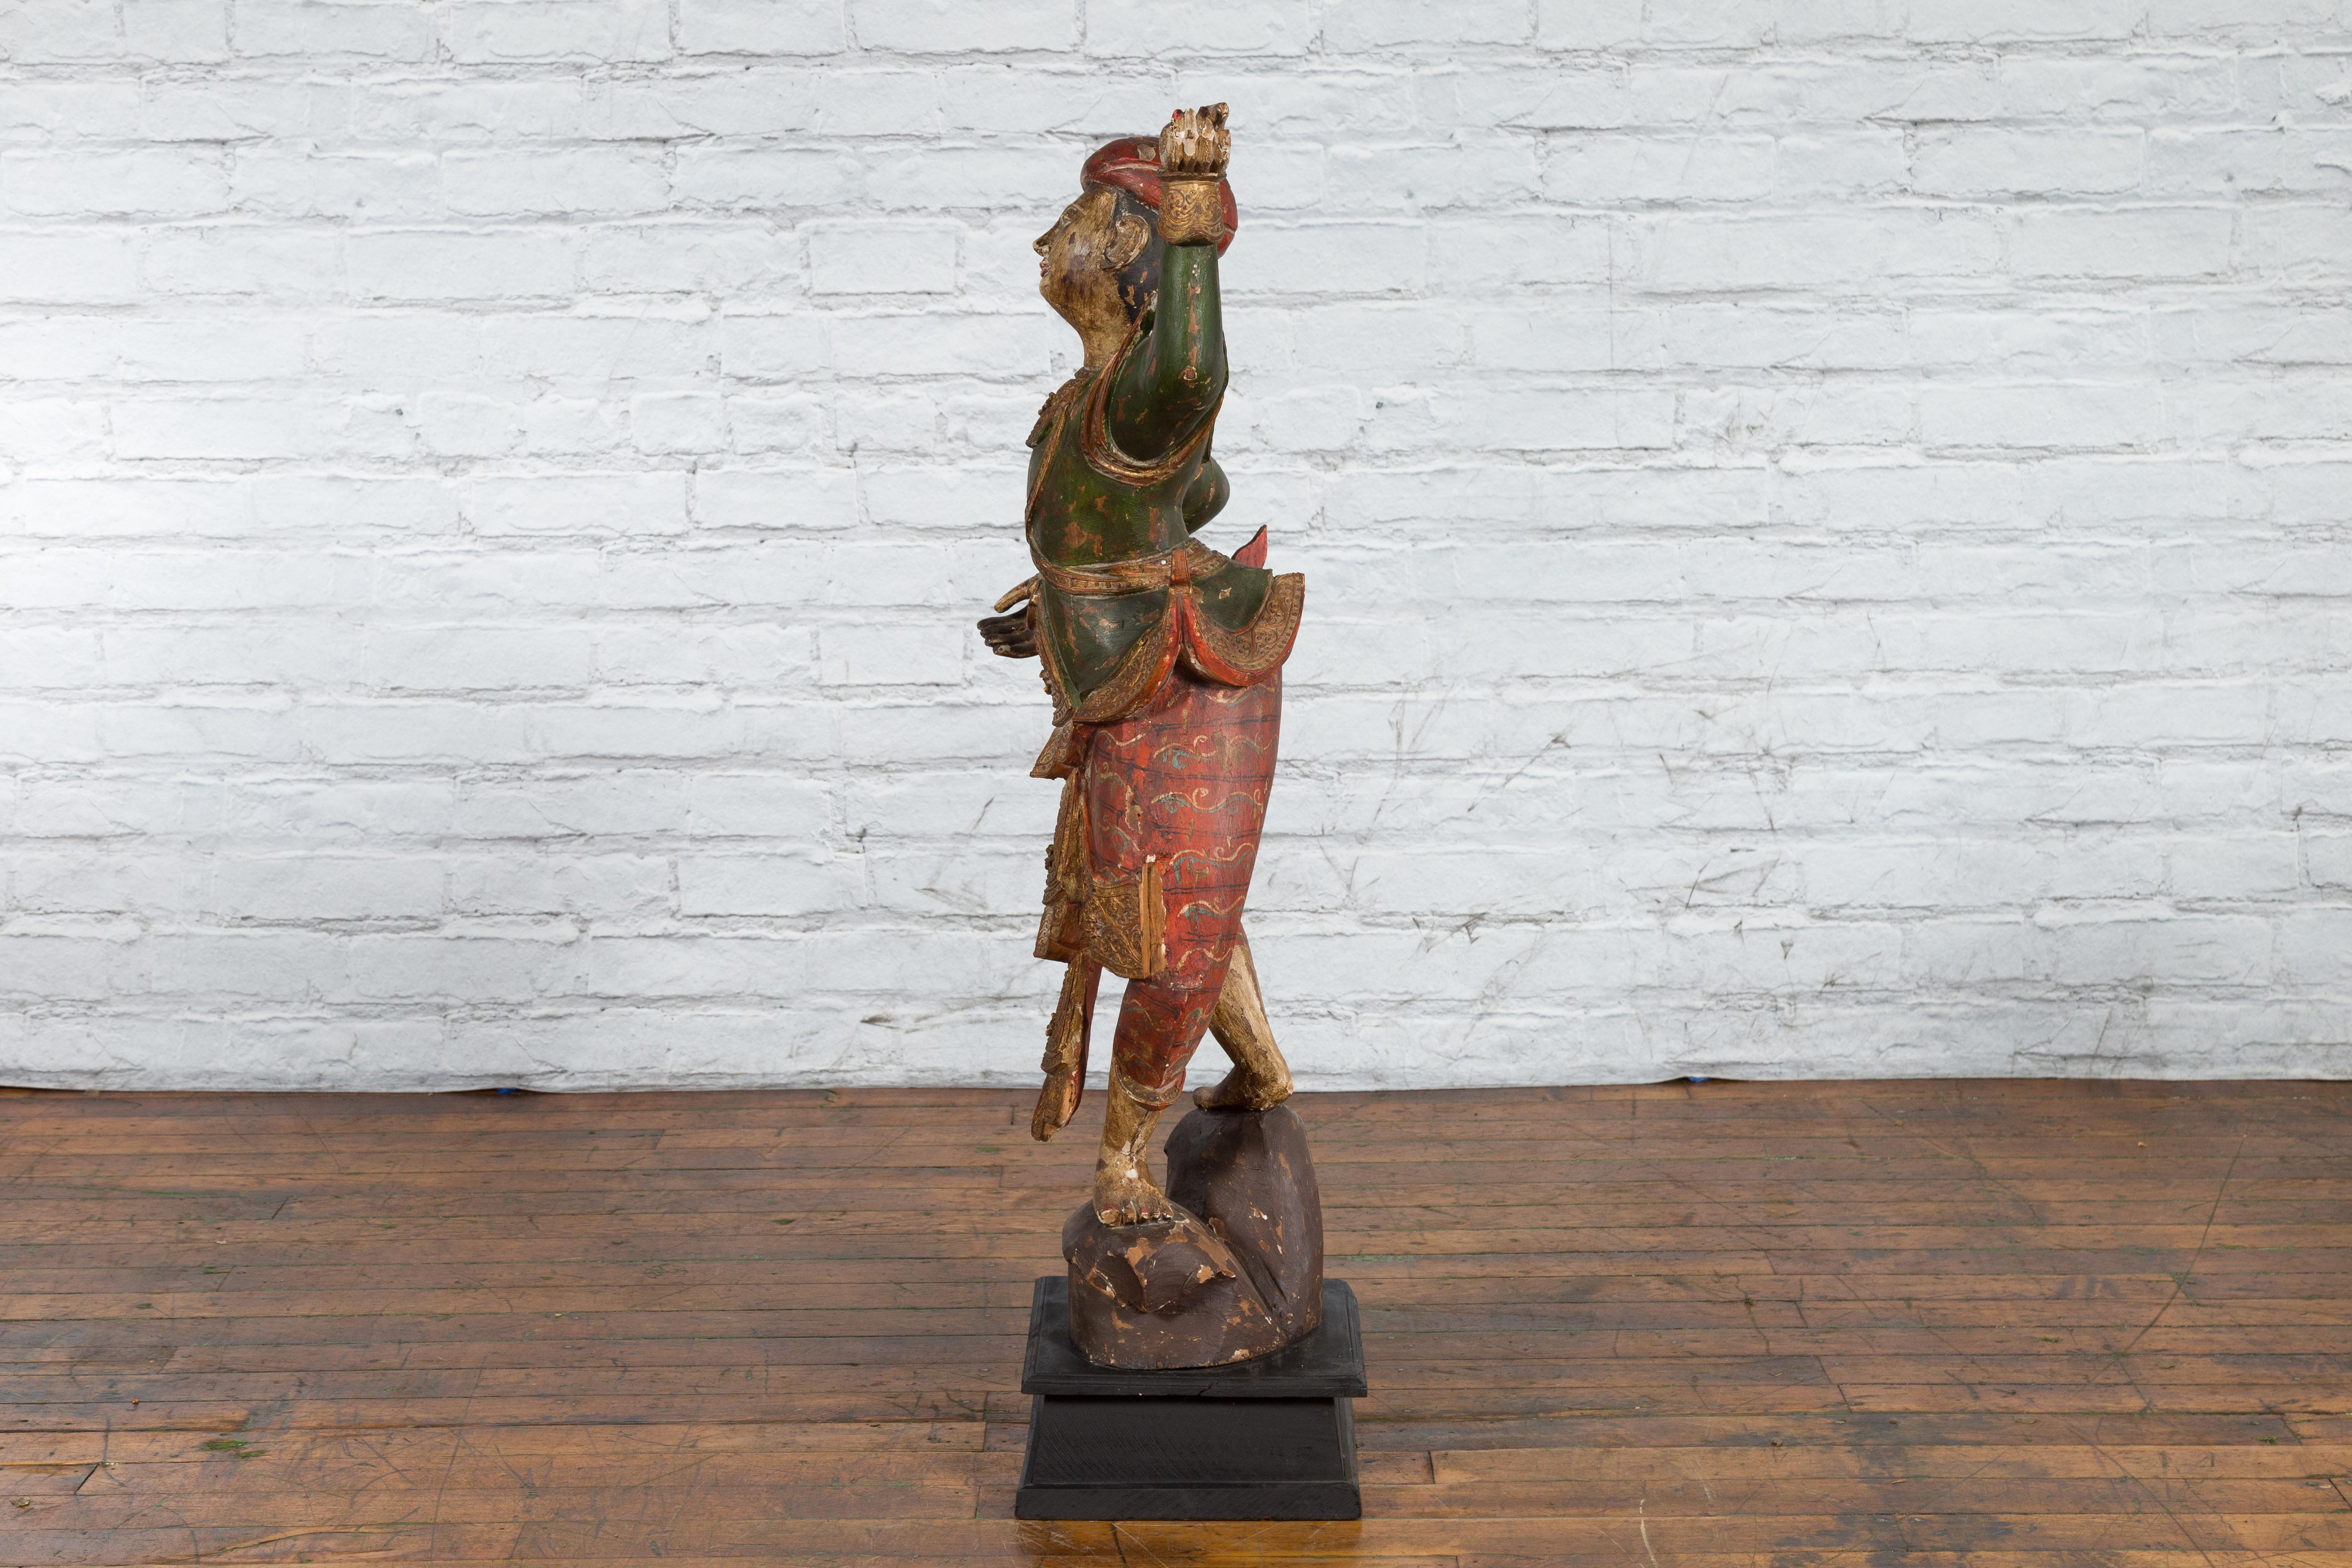 19th Century Balinese Hand-Carved and Painted Wooden Sculpture of a Young Dancer For Sale 8